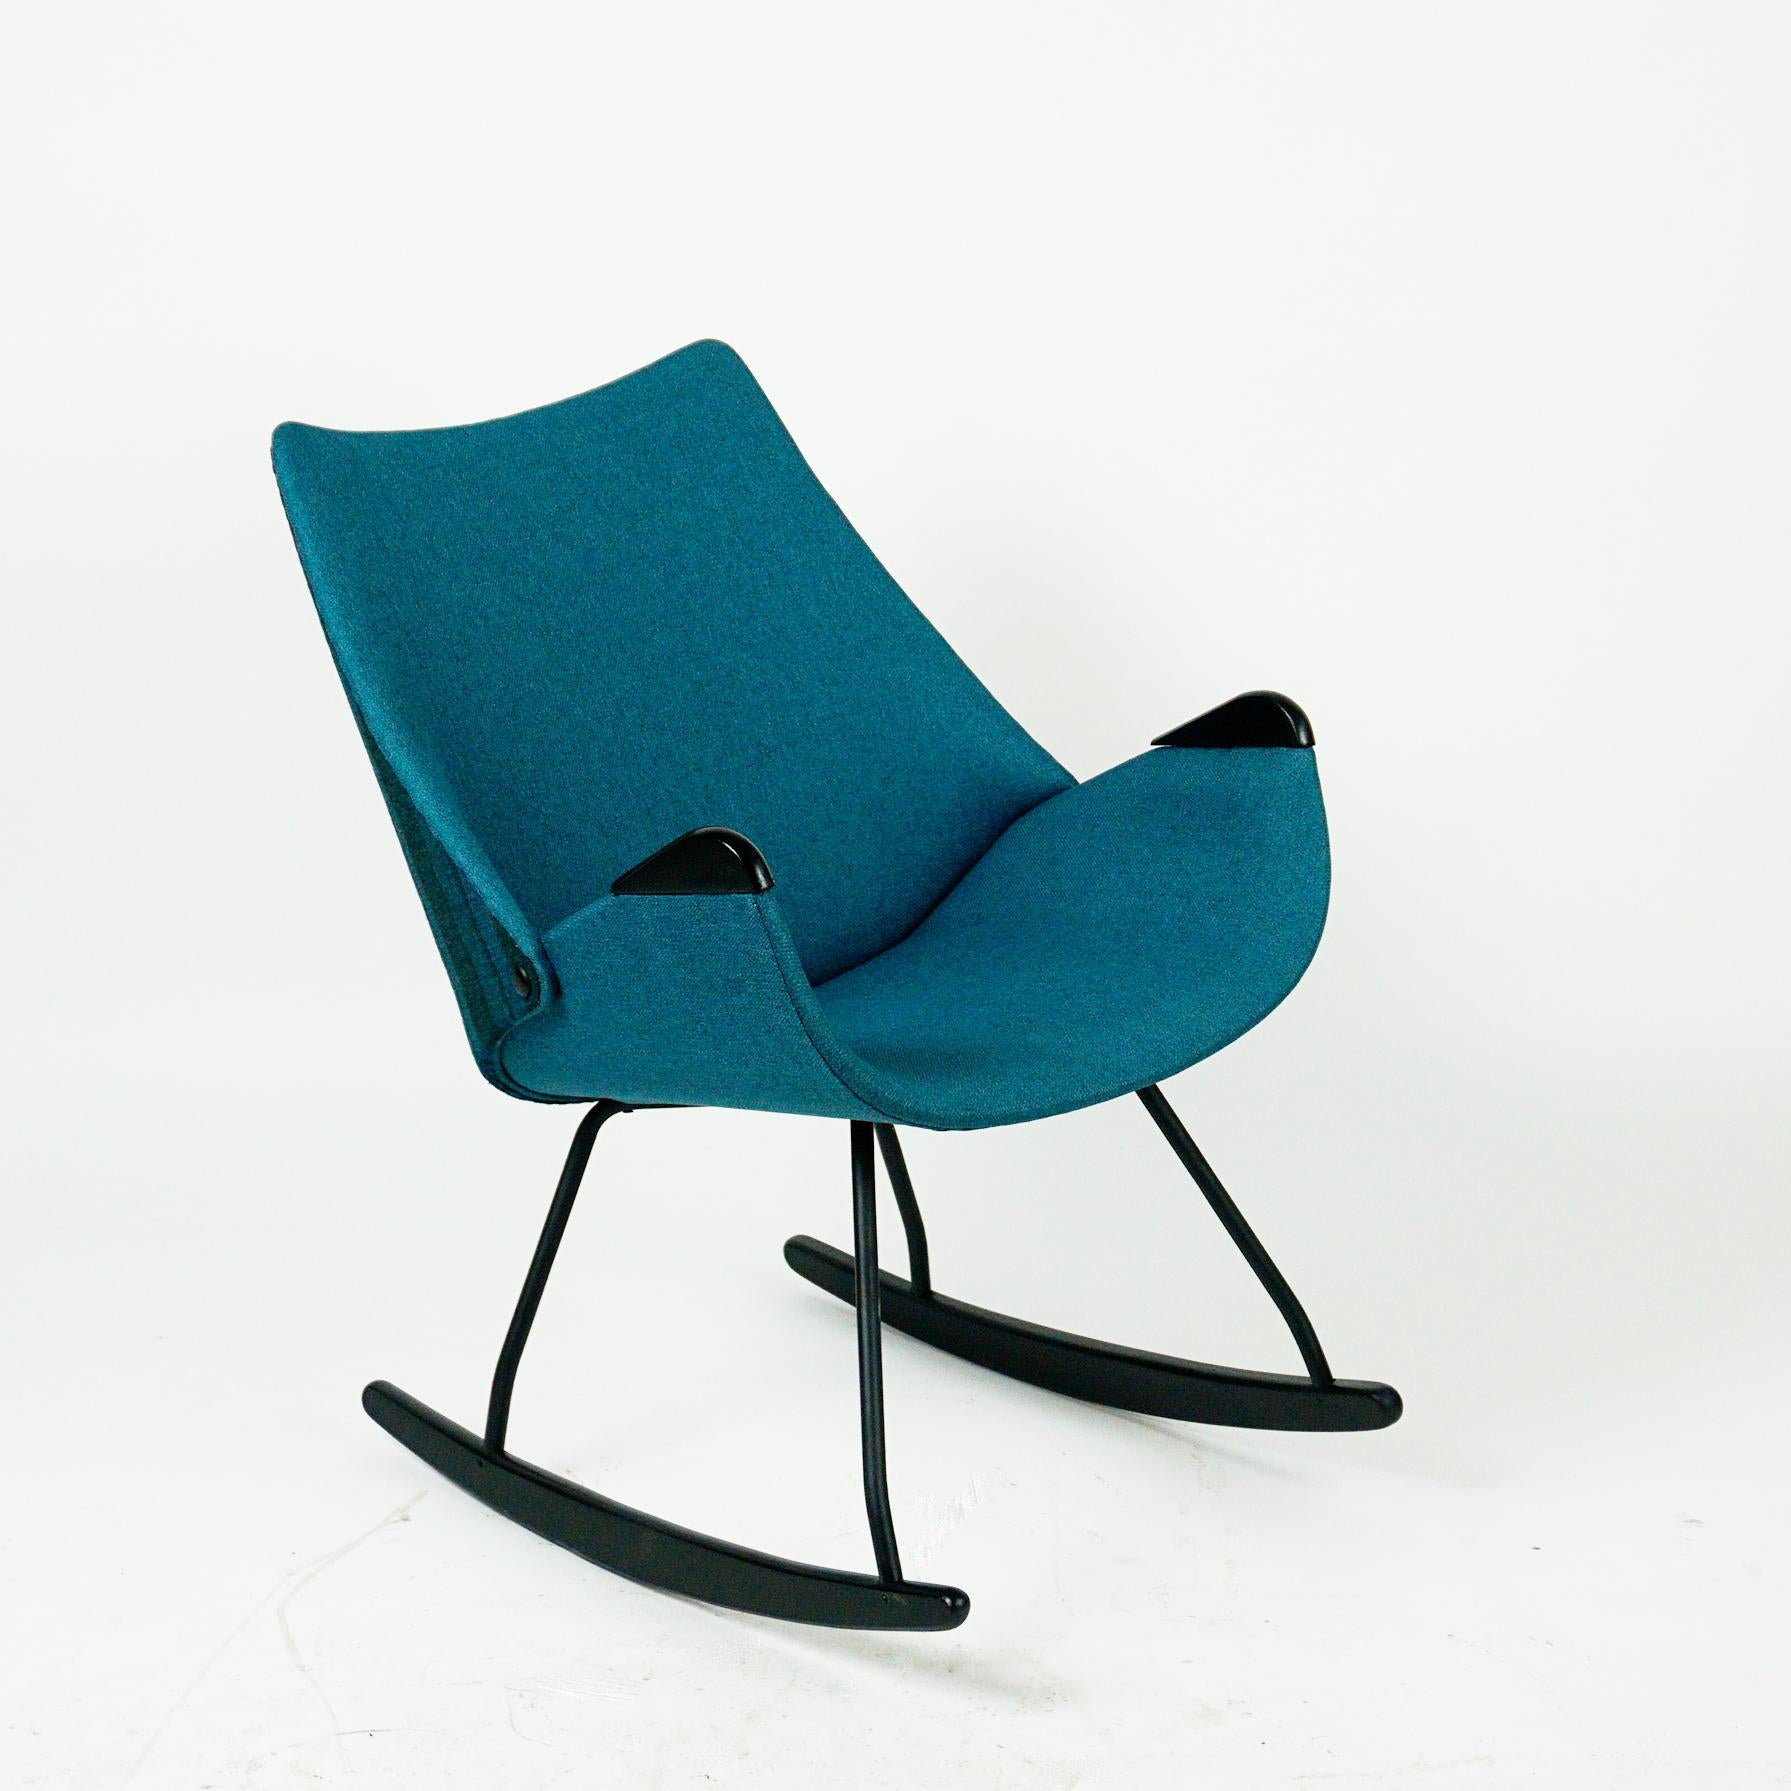 Mid-Century Modern Black Lacquered Scandinavian Shell Seat Rocking Chair with Blue Fabric